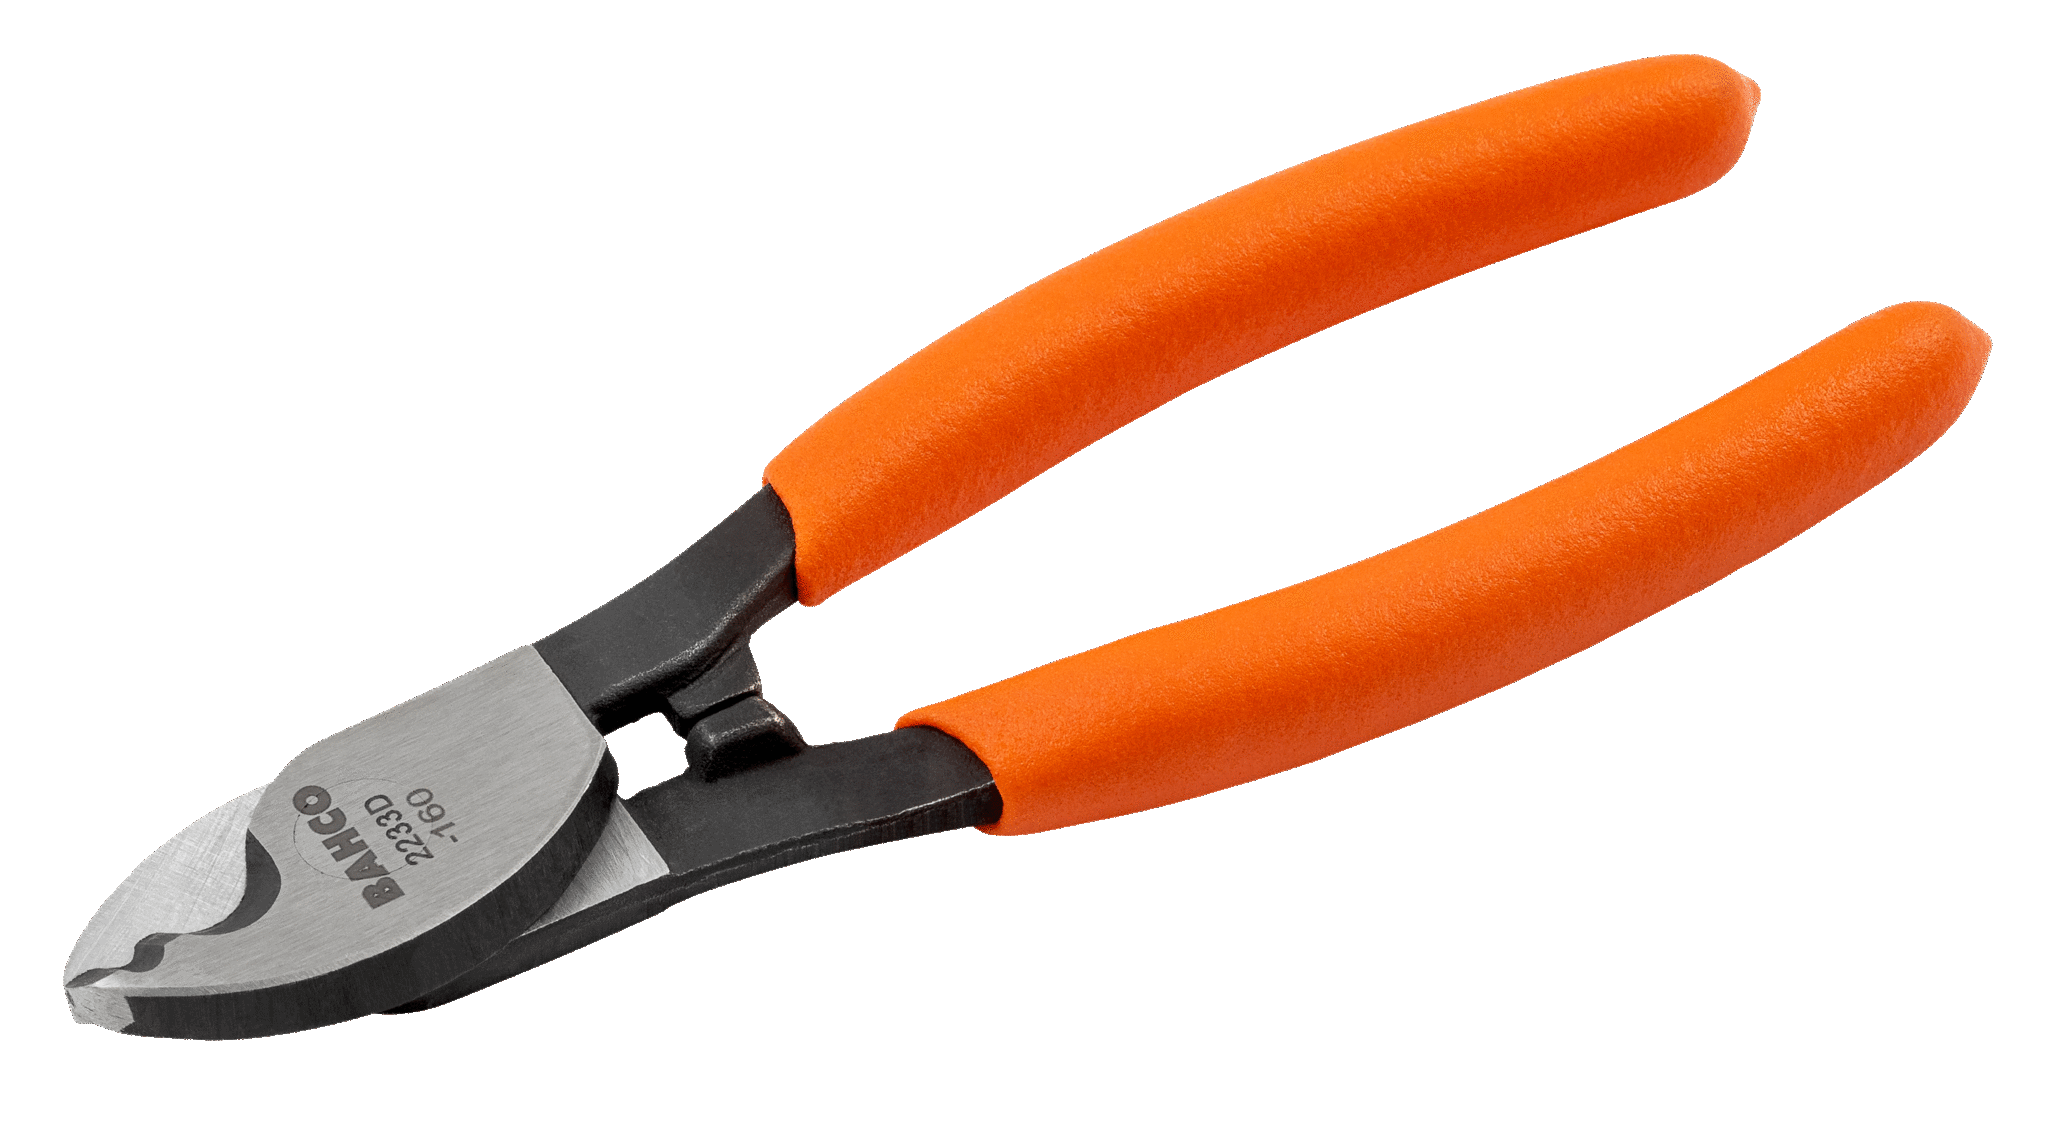 Cable Plier Shear Cutter & Electric Plastic Wire 6" Cutting Kit Stripper Tool 